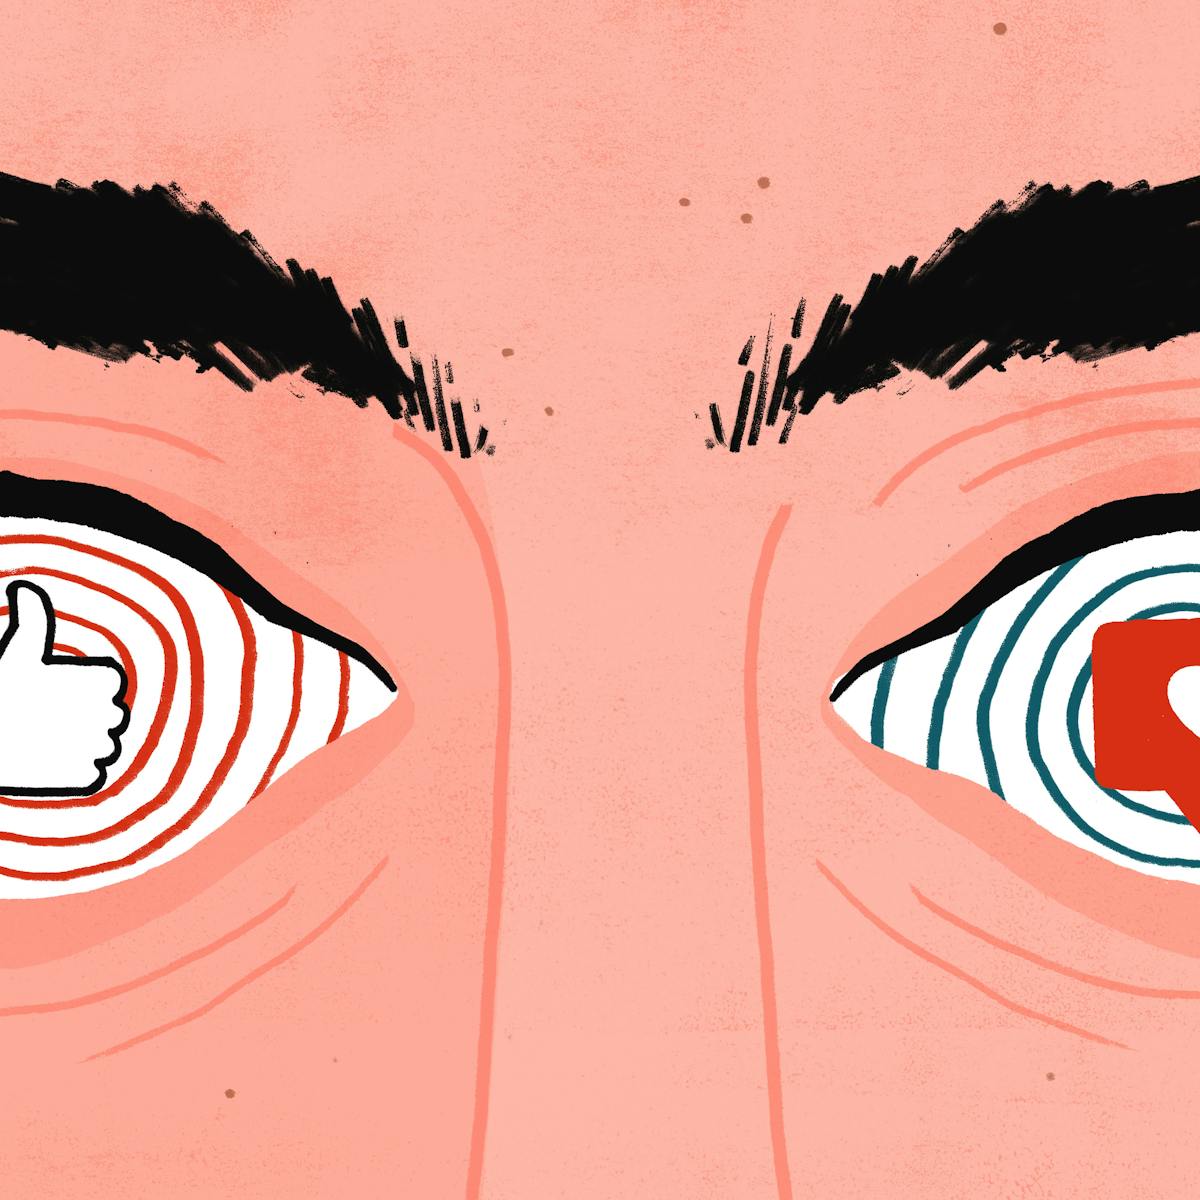 A person's eyes have been replaced with hypnotic spirals containing facebook and instagram 'likes'.